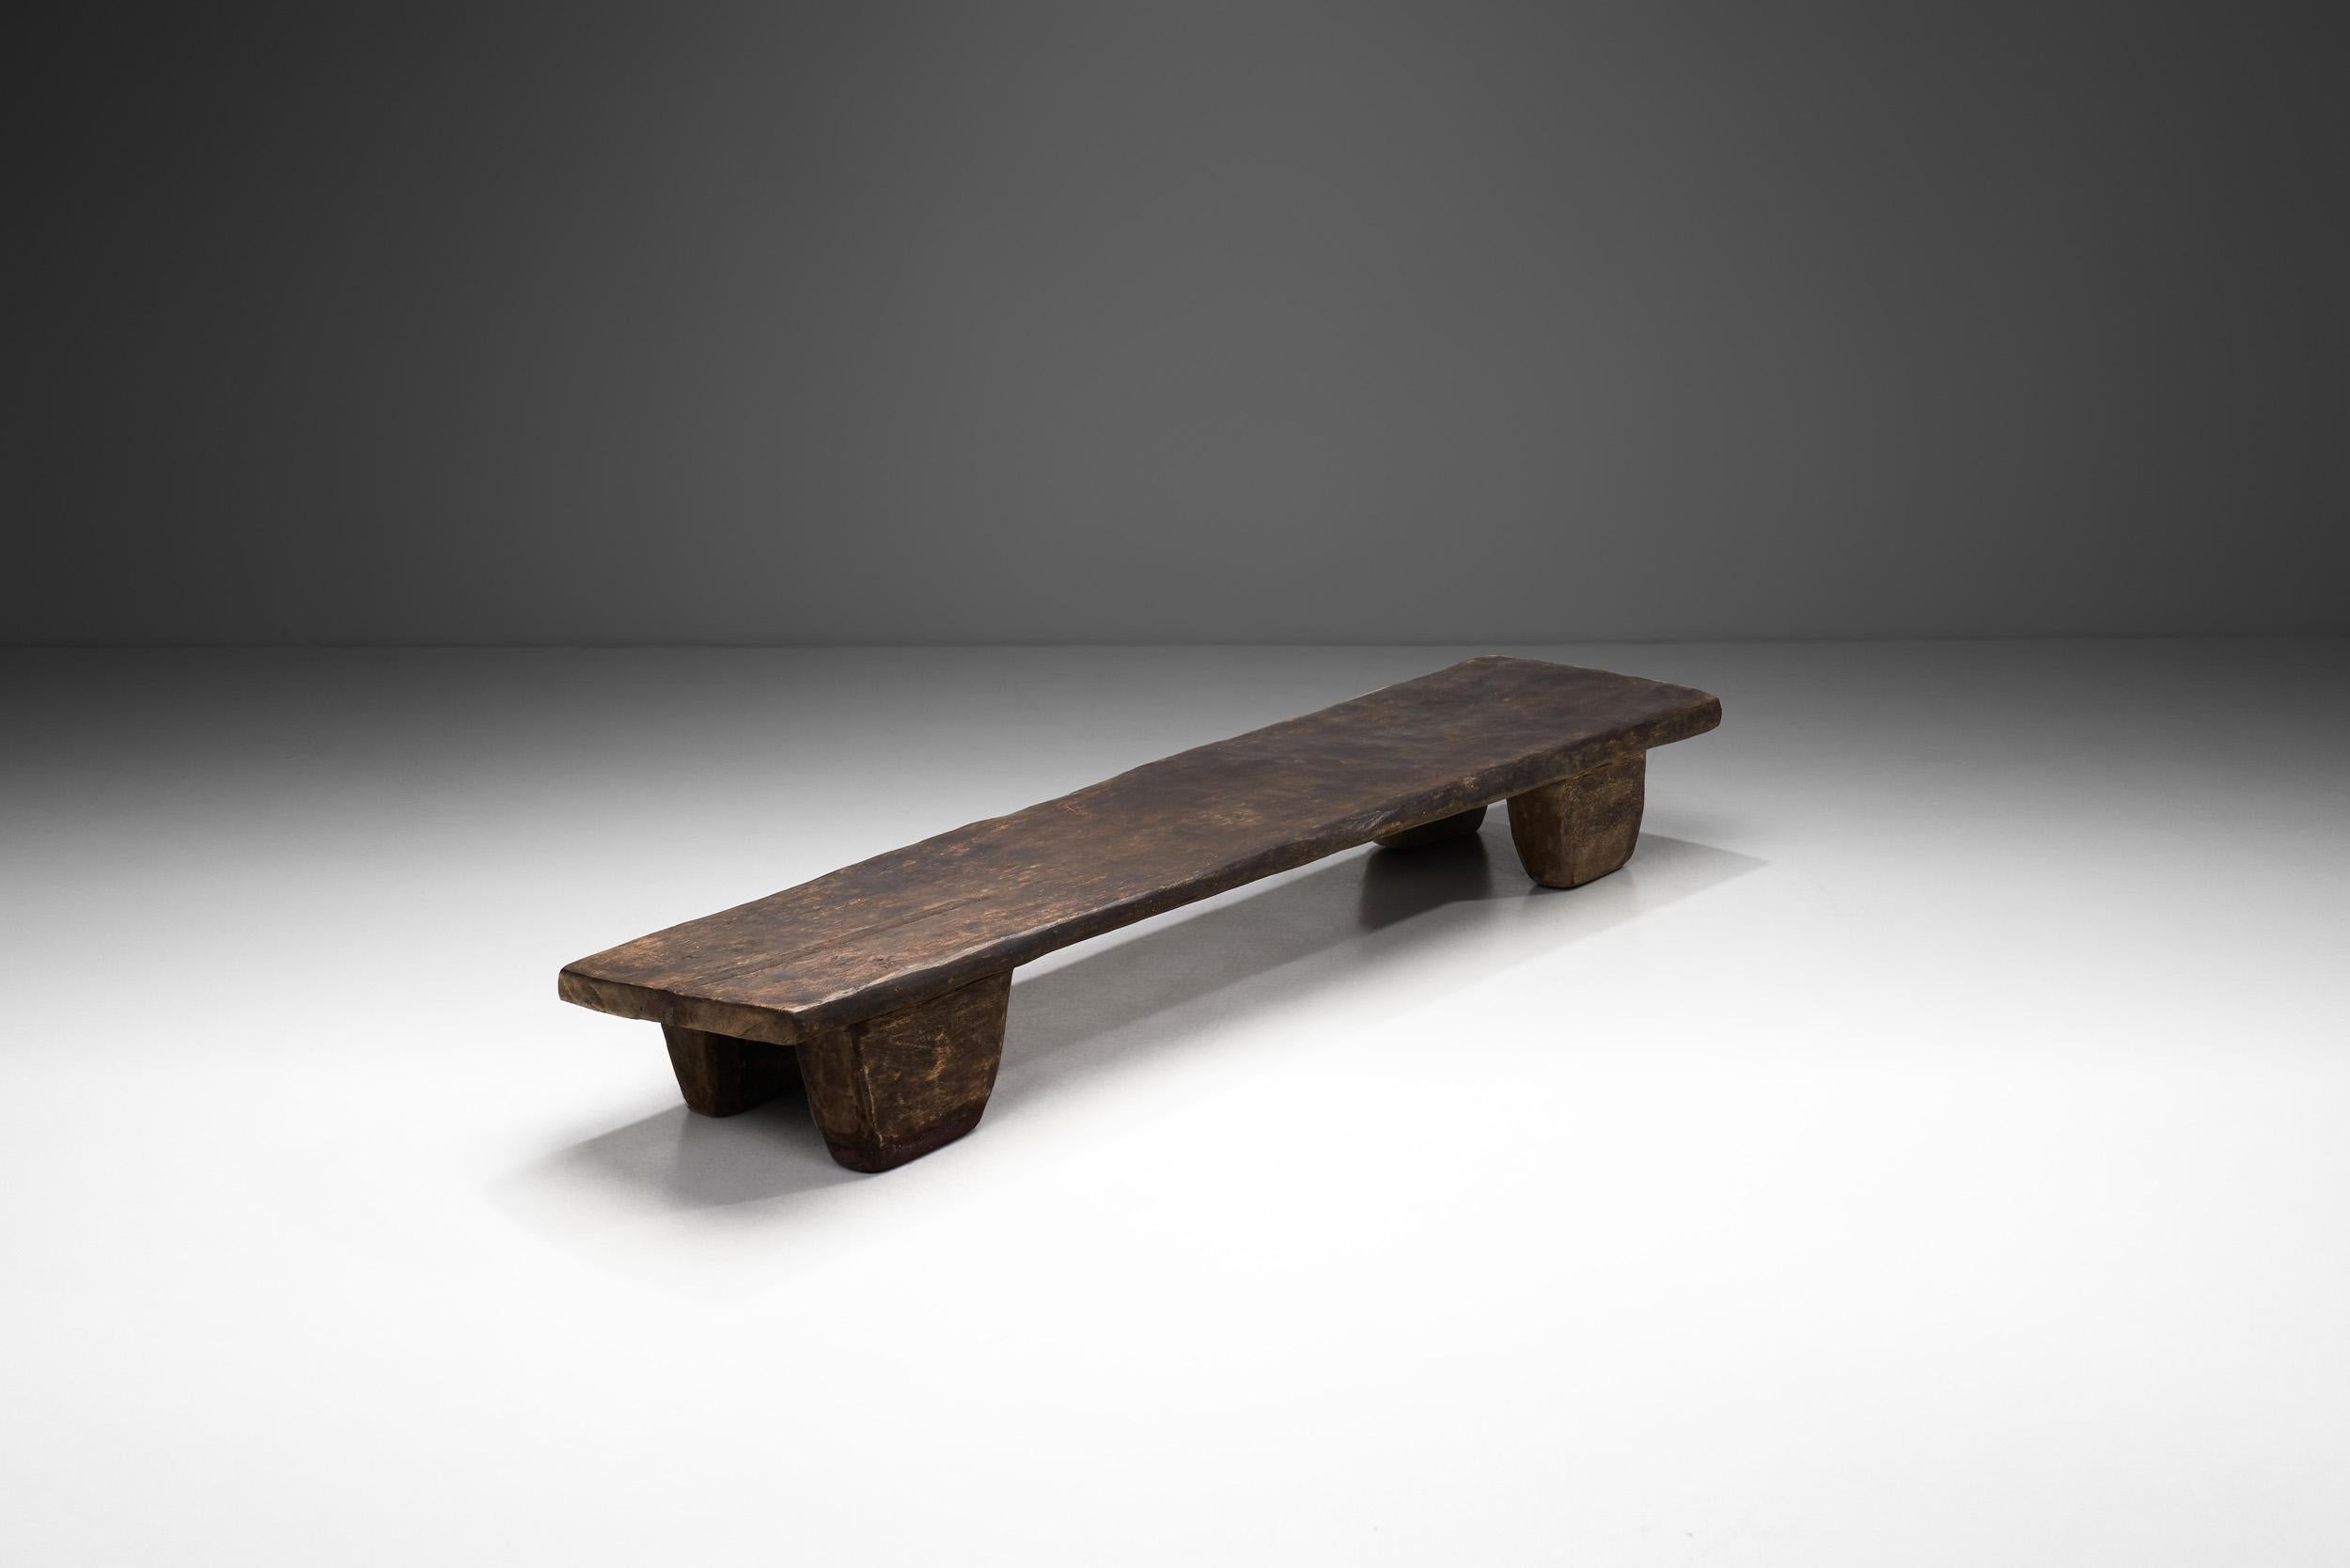 Brutalist Rustic Solid Wood Naga Coffee Table, India Early 20th Century